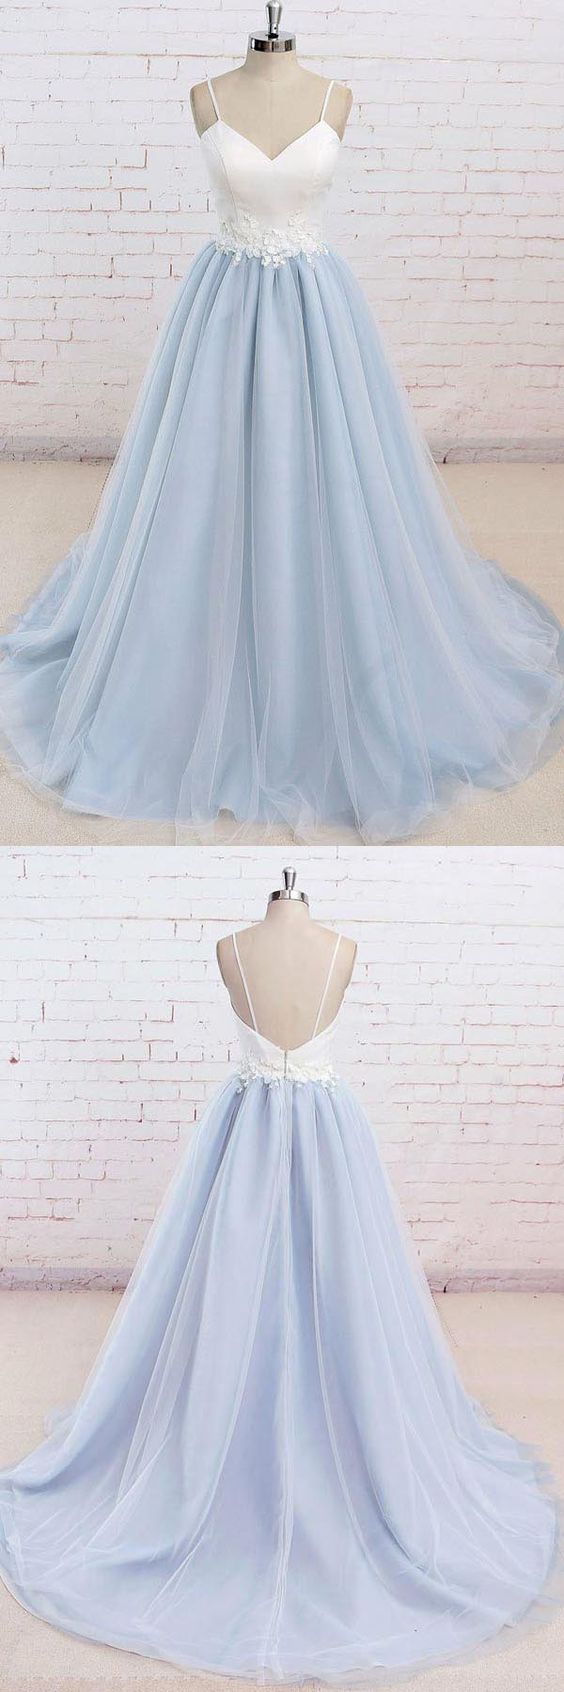 Spaghetti Straps prom dress Sweep Train party dress Backless evening dress Light Blue party dress Tulle Prom Dress